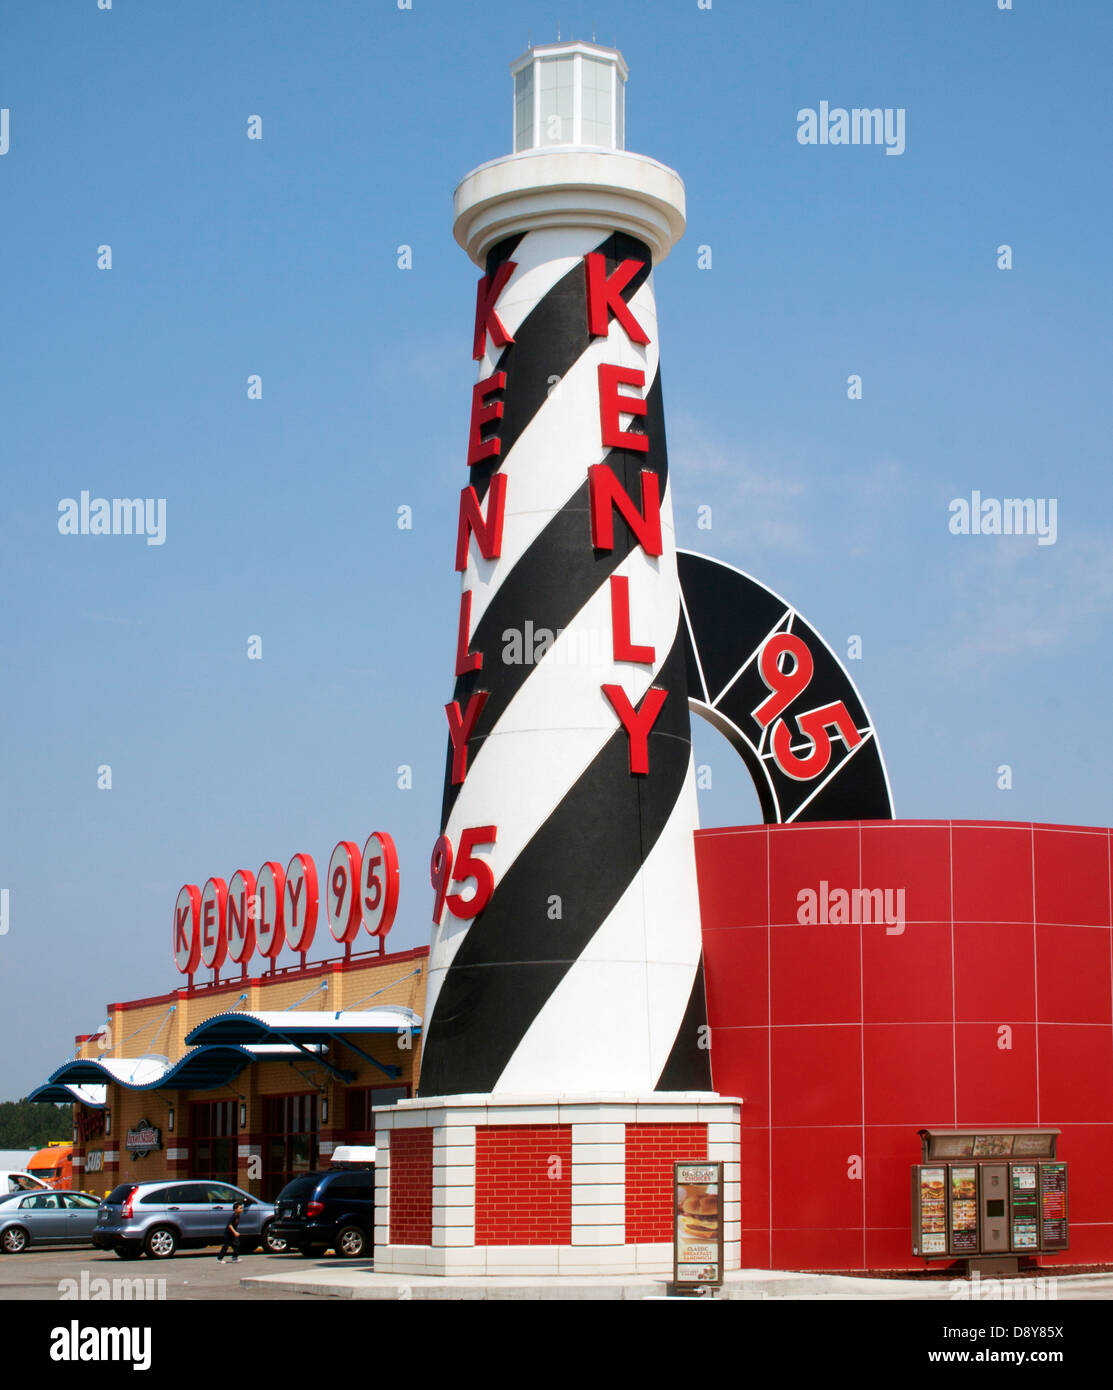 Giant Lighthouse at a rest area in Kenly North Carolina Stock Photo